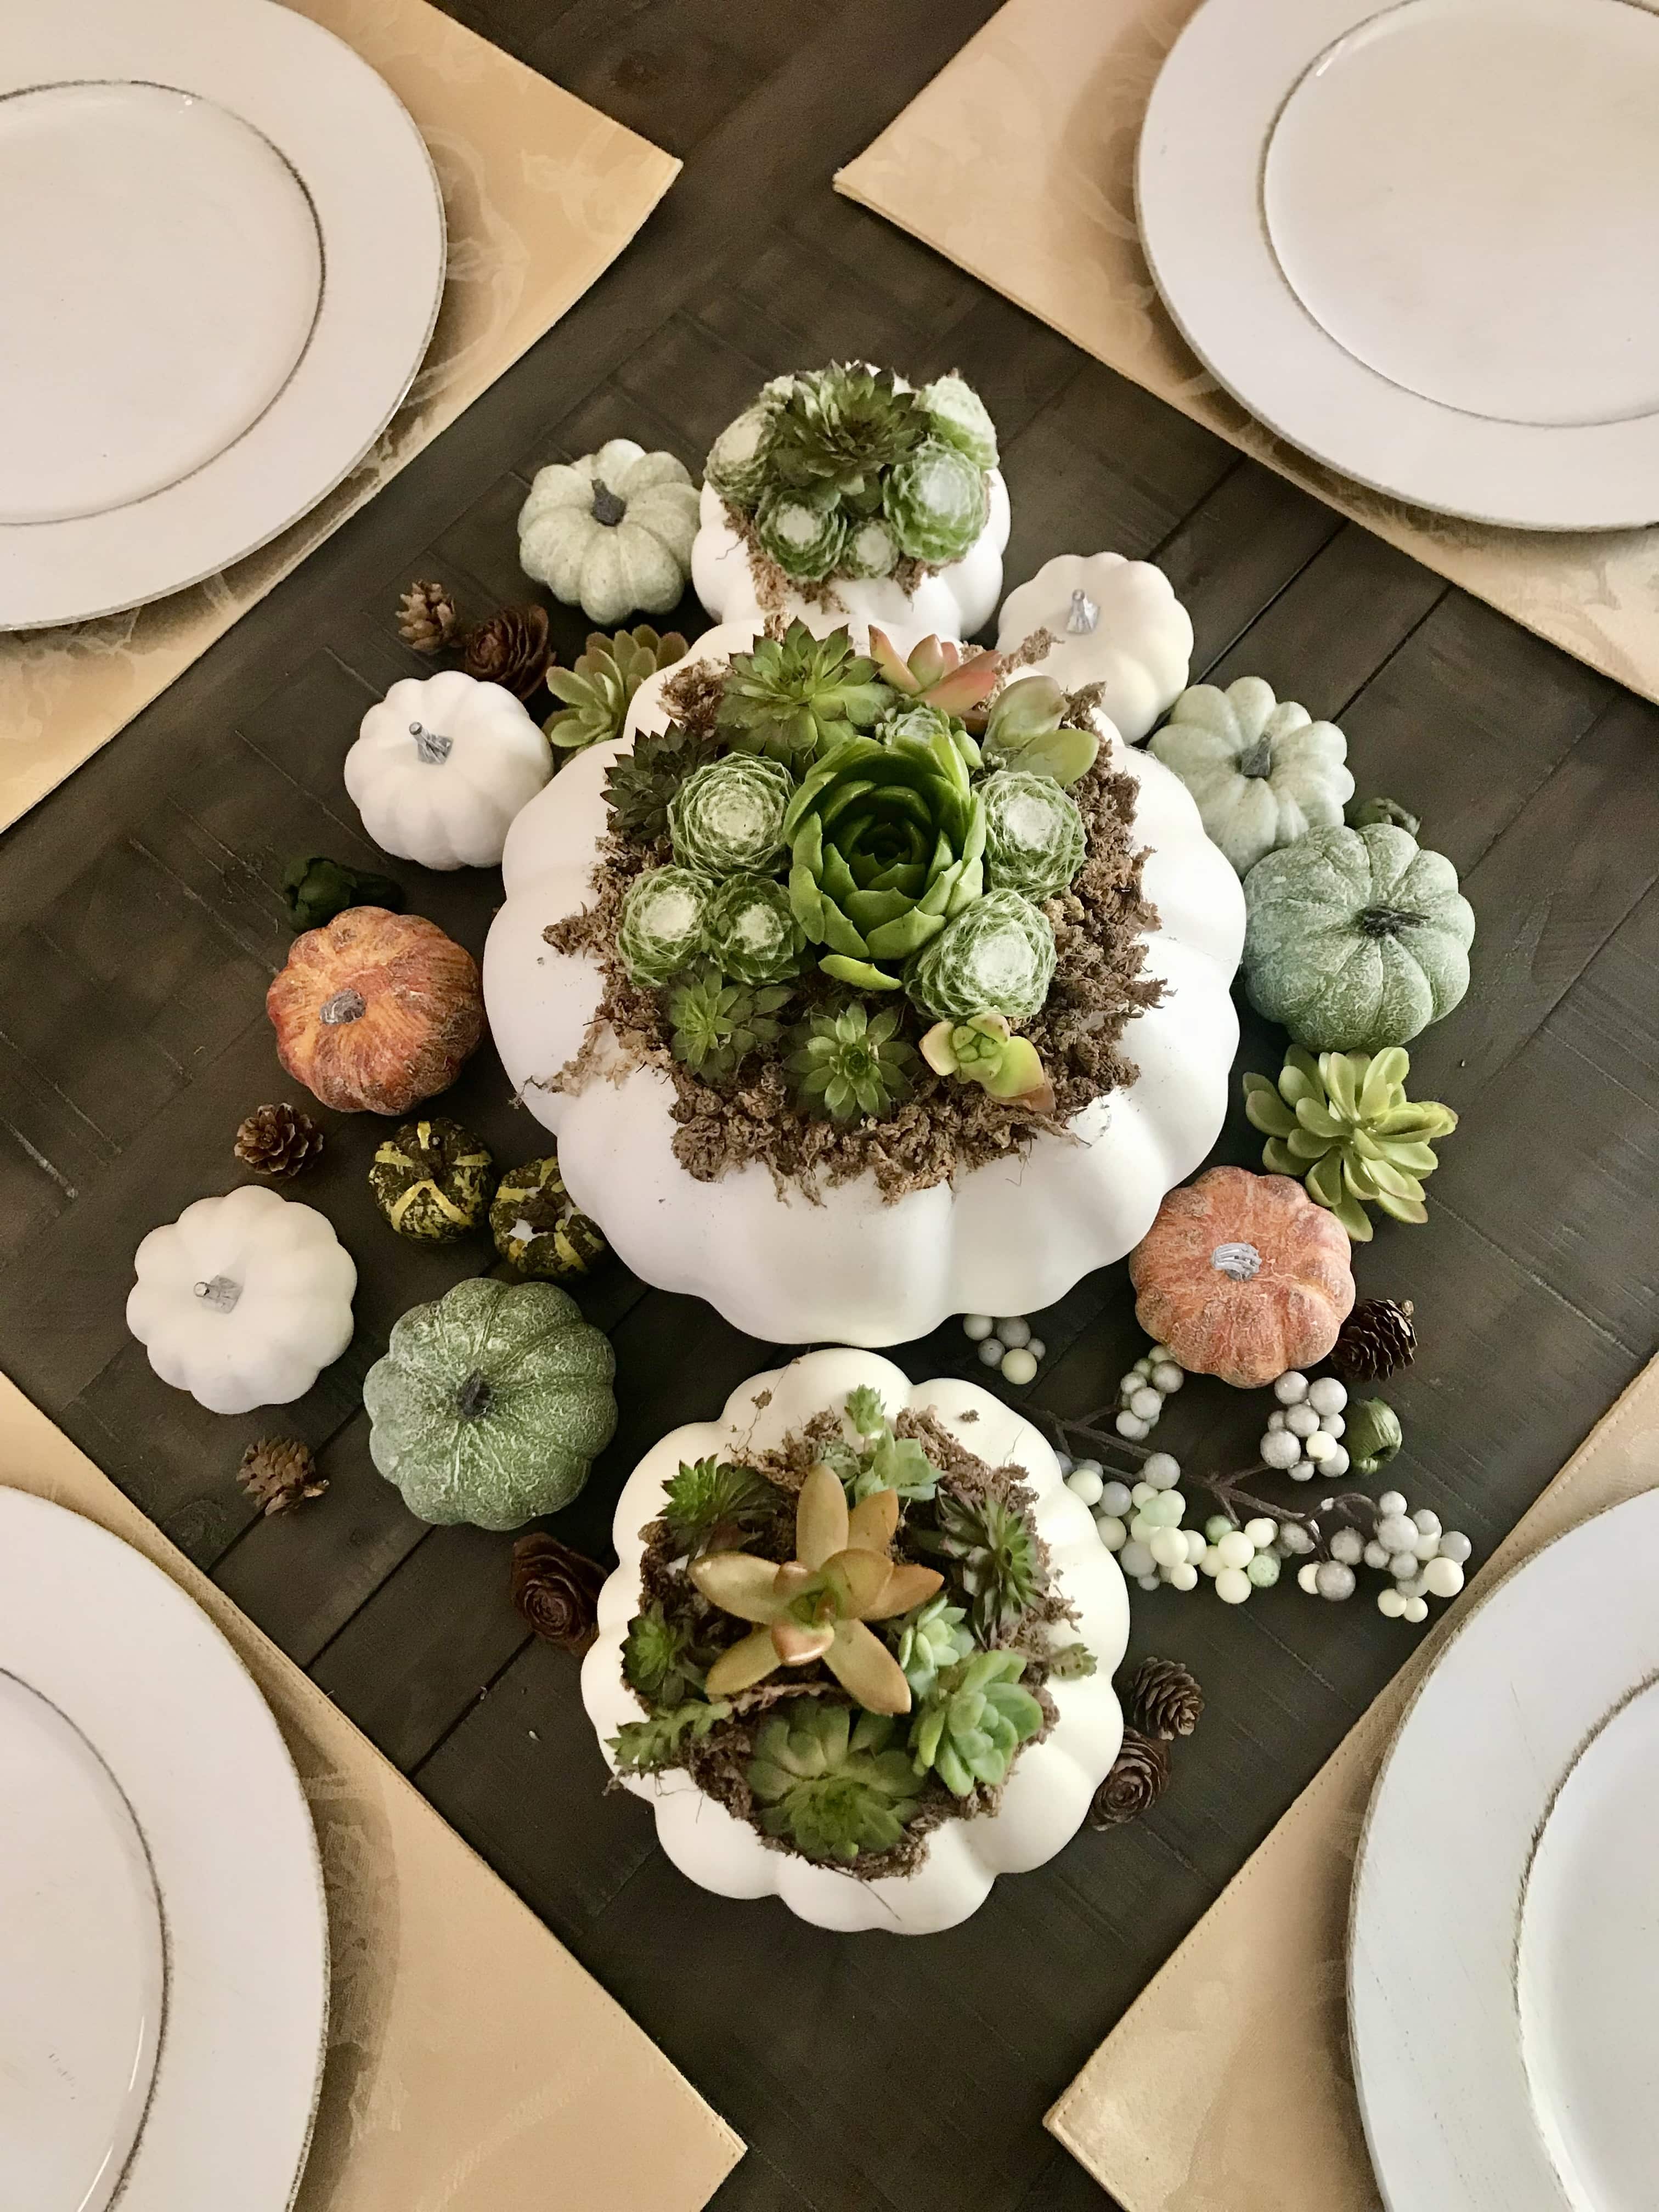 A Succulent pumpkin table centerpiece. Large white pumpkin with succulents surrounded by smaller faux pumpkins at the center of the table. Placemats and white plates also shown.